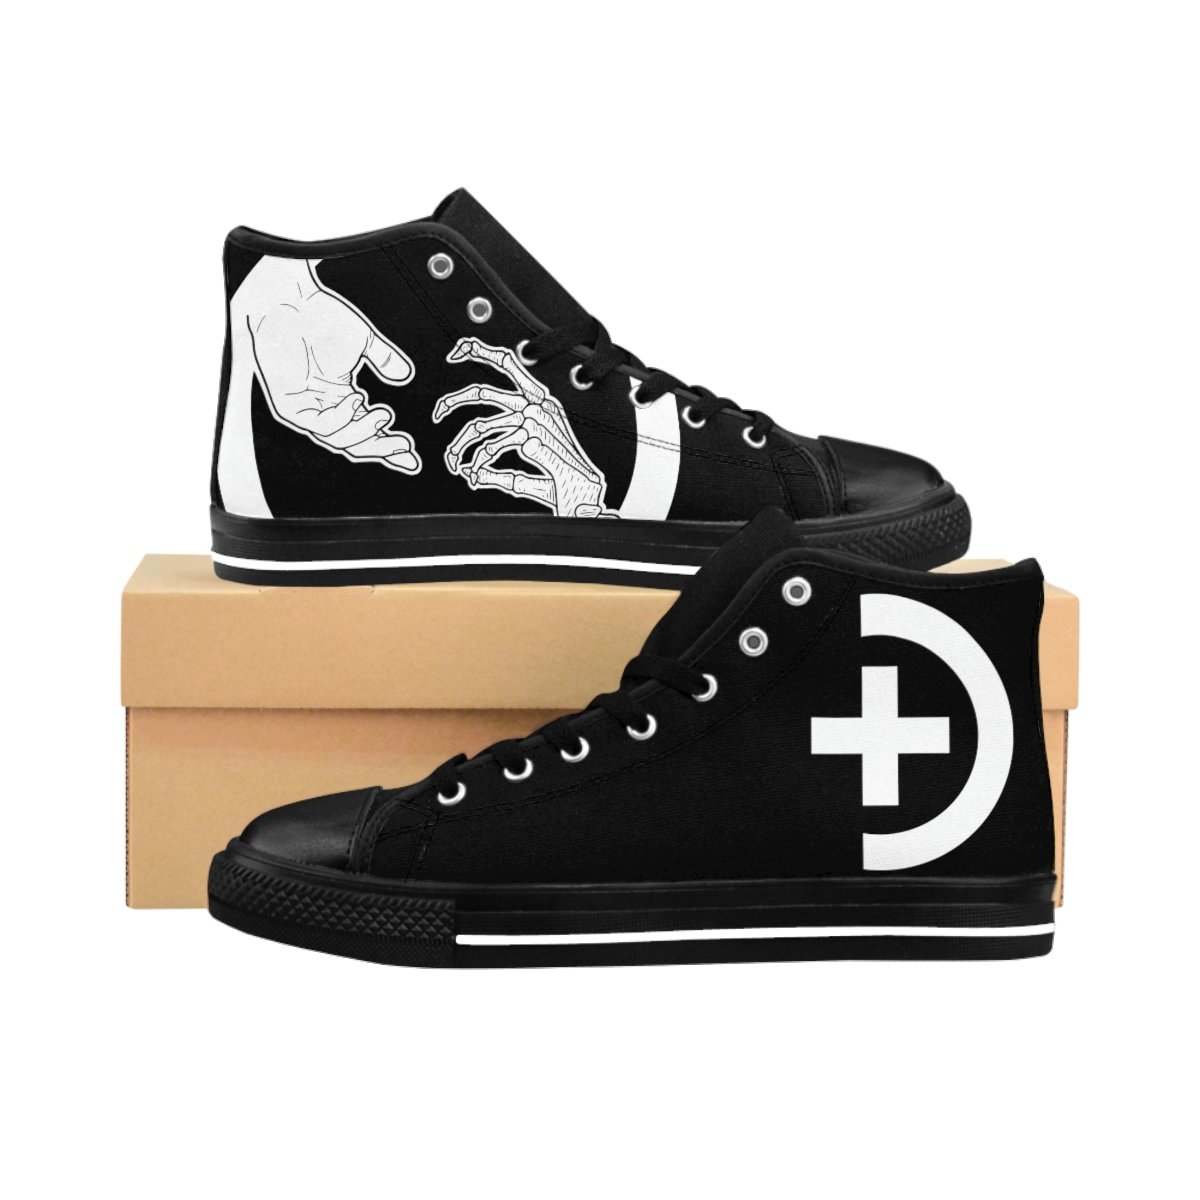 Death Therapy Men’s High-top Sneakers